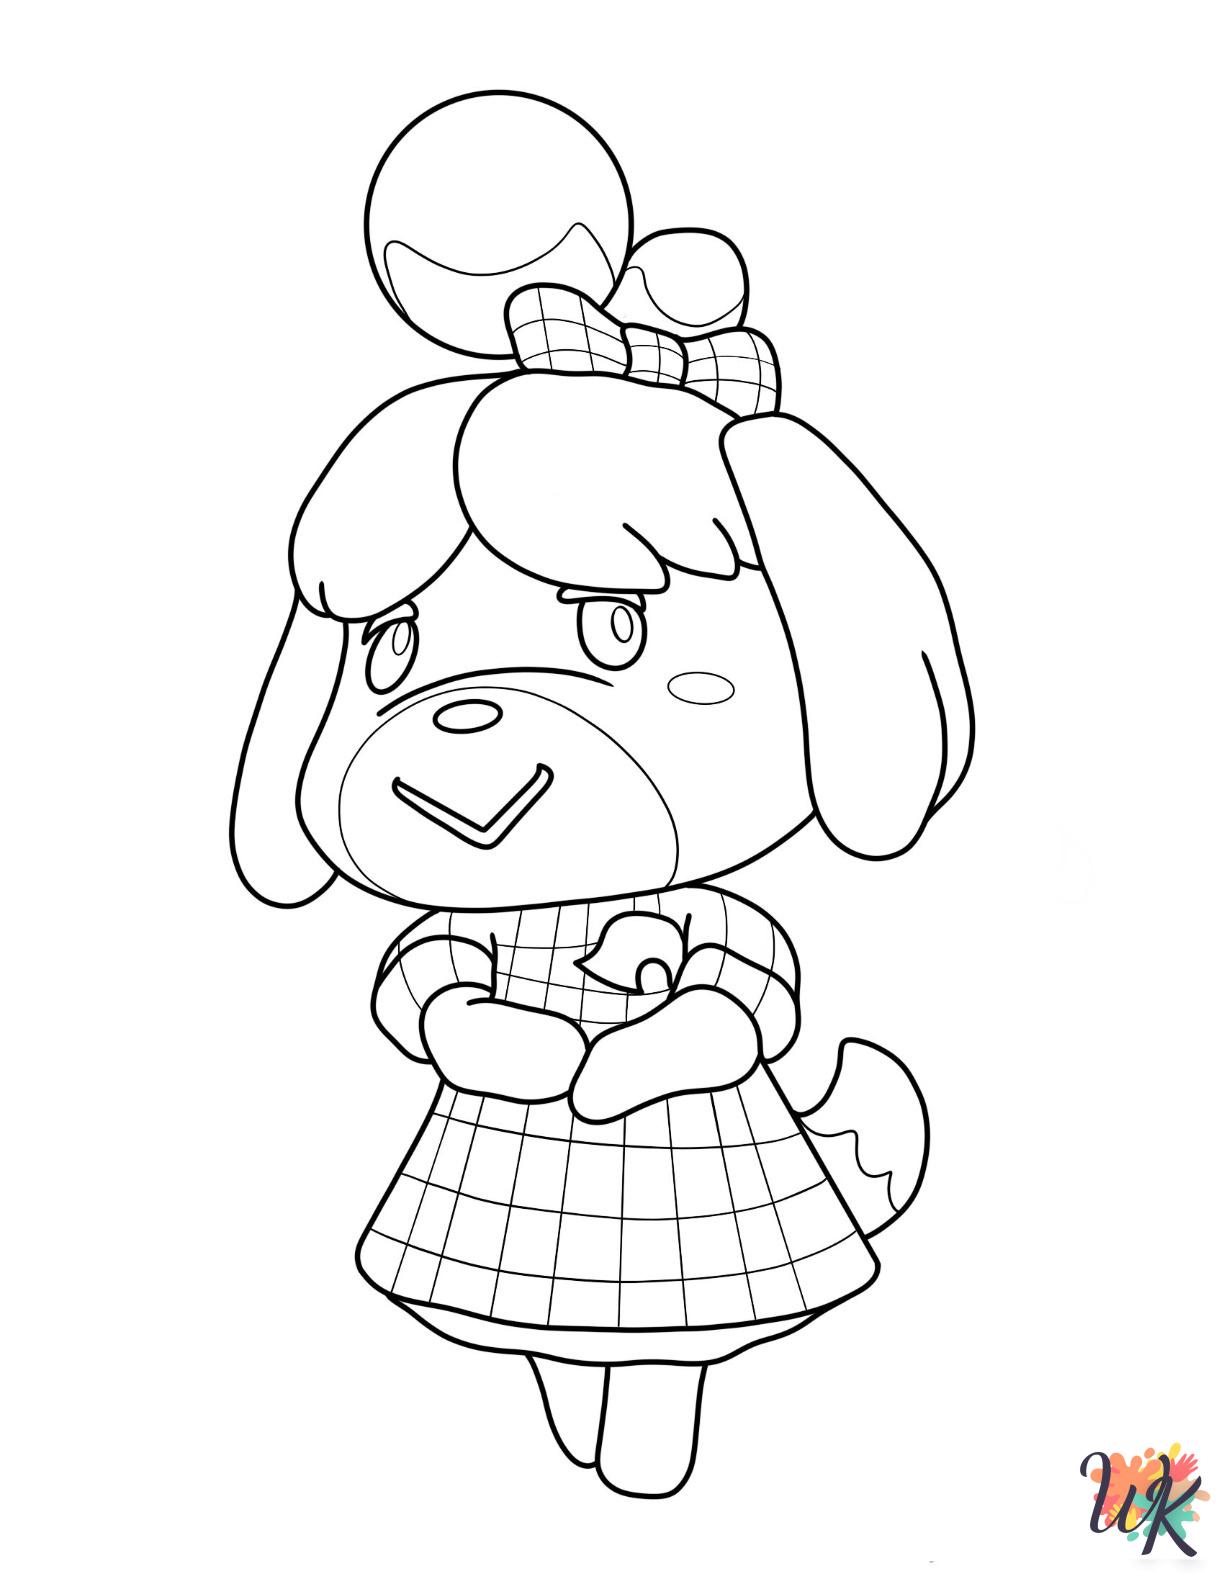 printable Animal Crossing coloring pages for adults